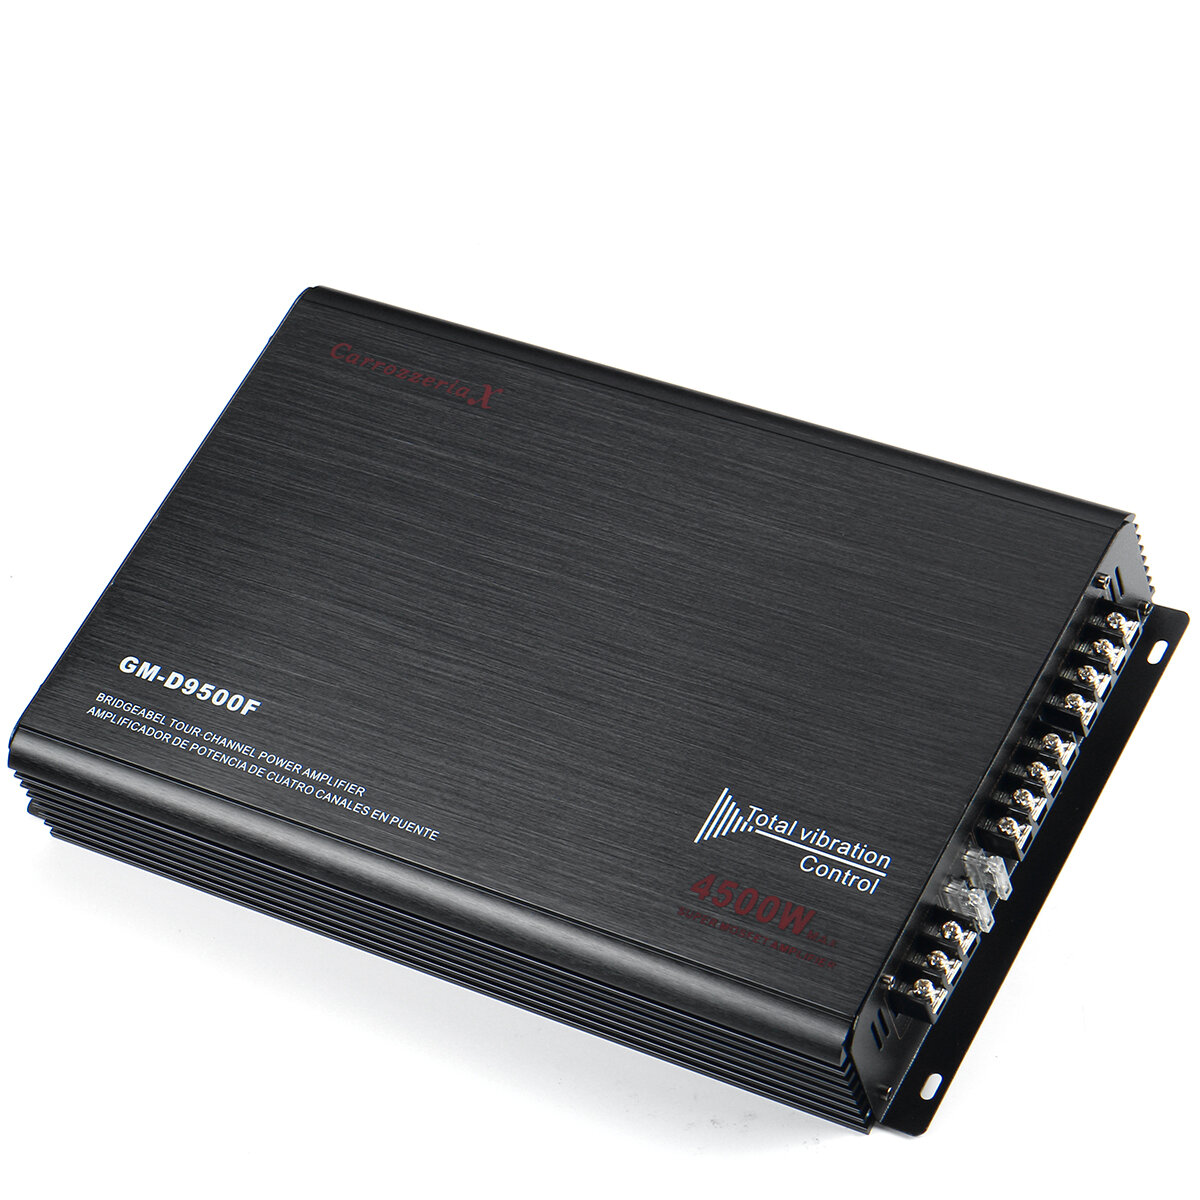 GM-D9500F 12V 4500W Car Audio Stereo Power Amplifier4 Channel Class A/B 3D Stereo Surround Subwoofer